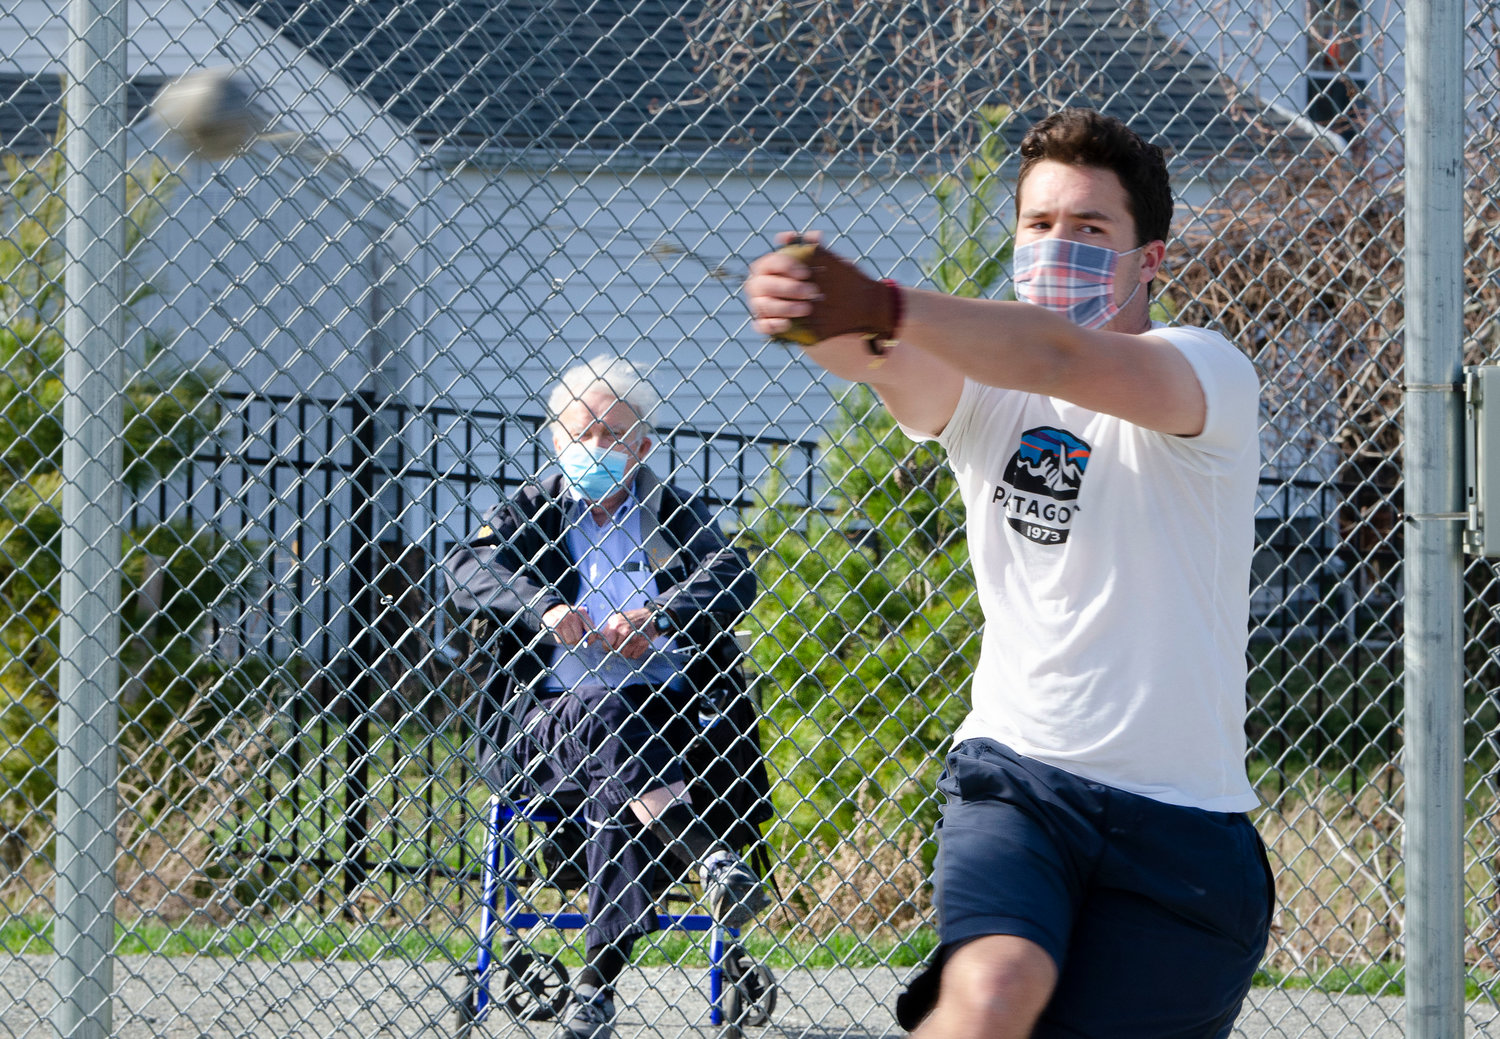 Longtime Barrington High School throwing coach Bob Gourley watches the Eagles’ Liam Capozza throw the hammer during a recent practice session.